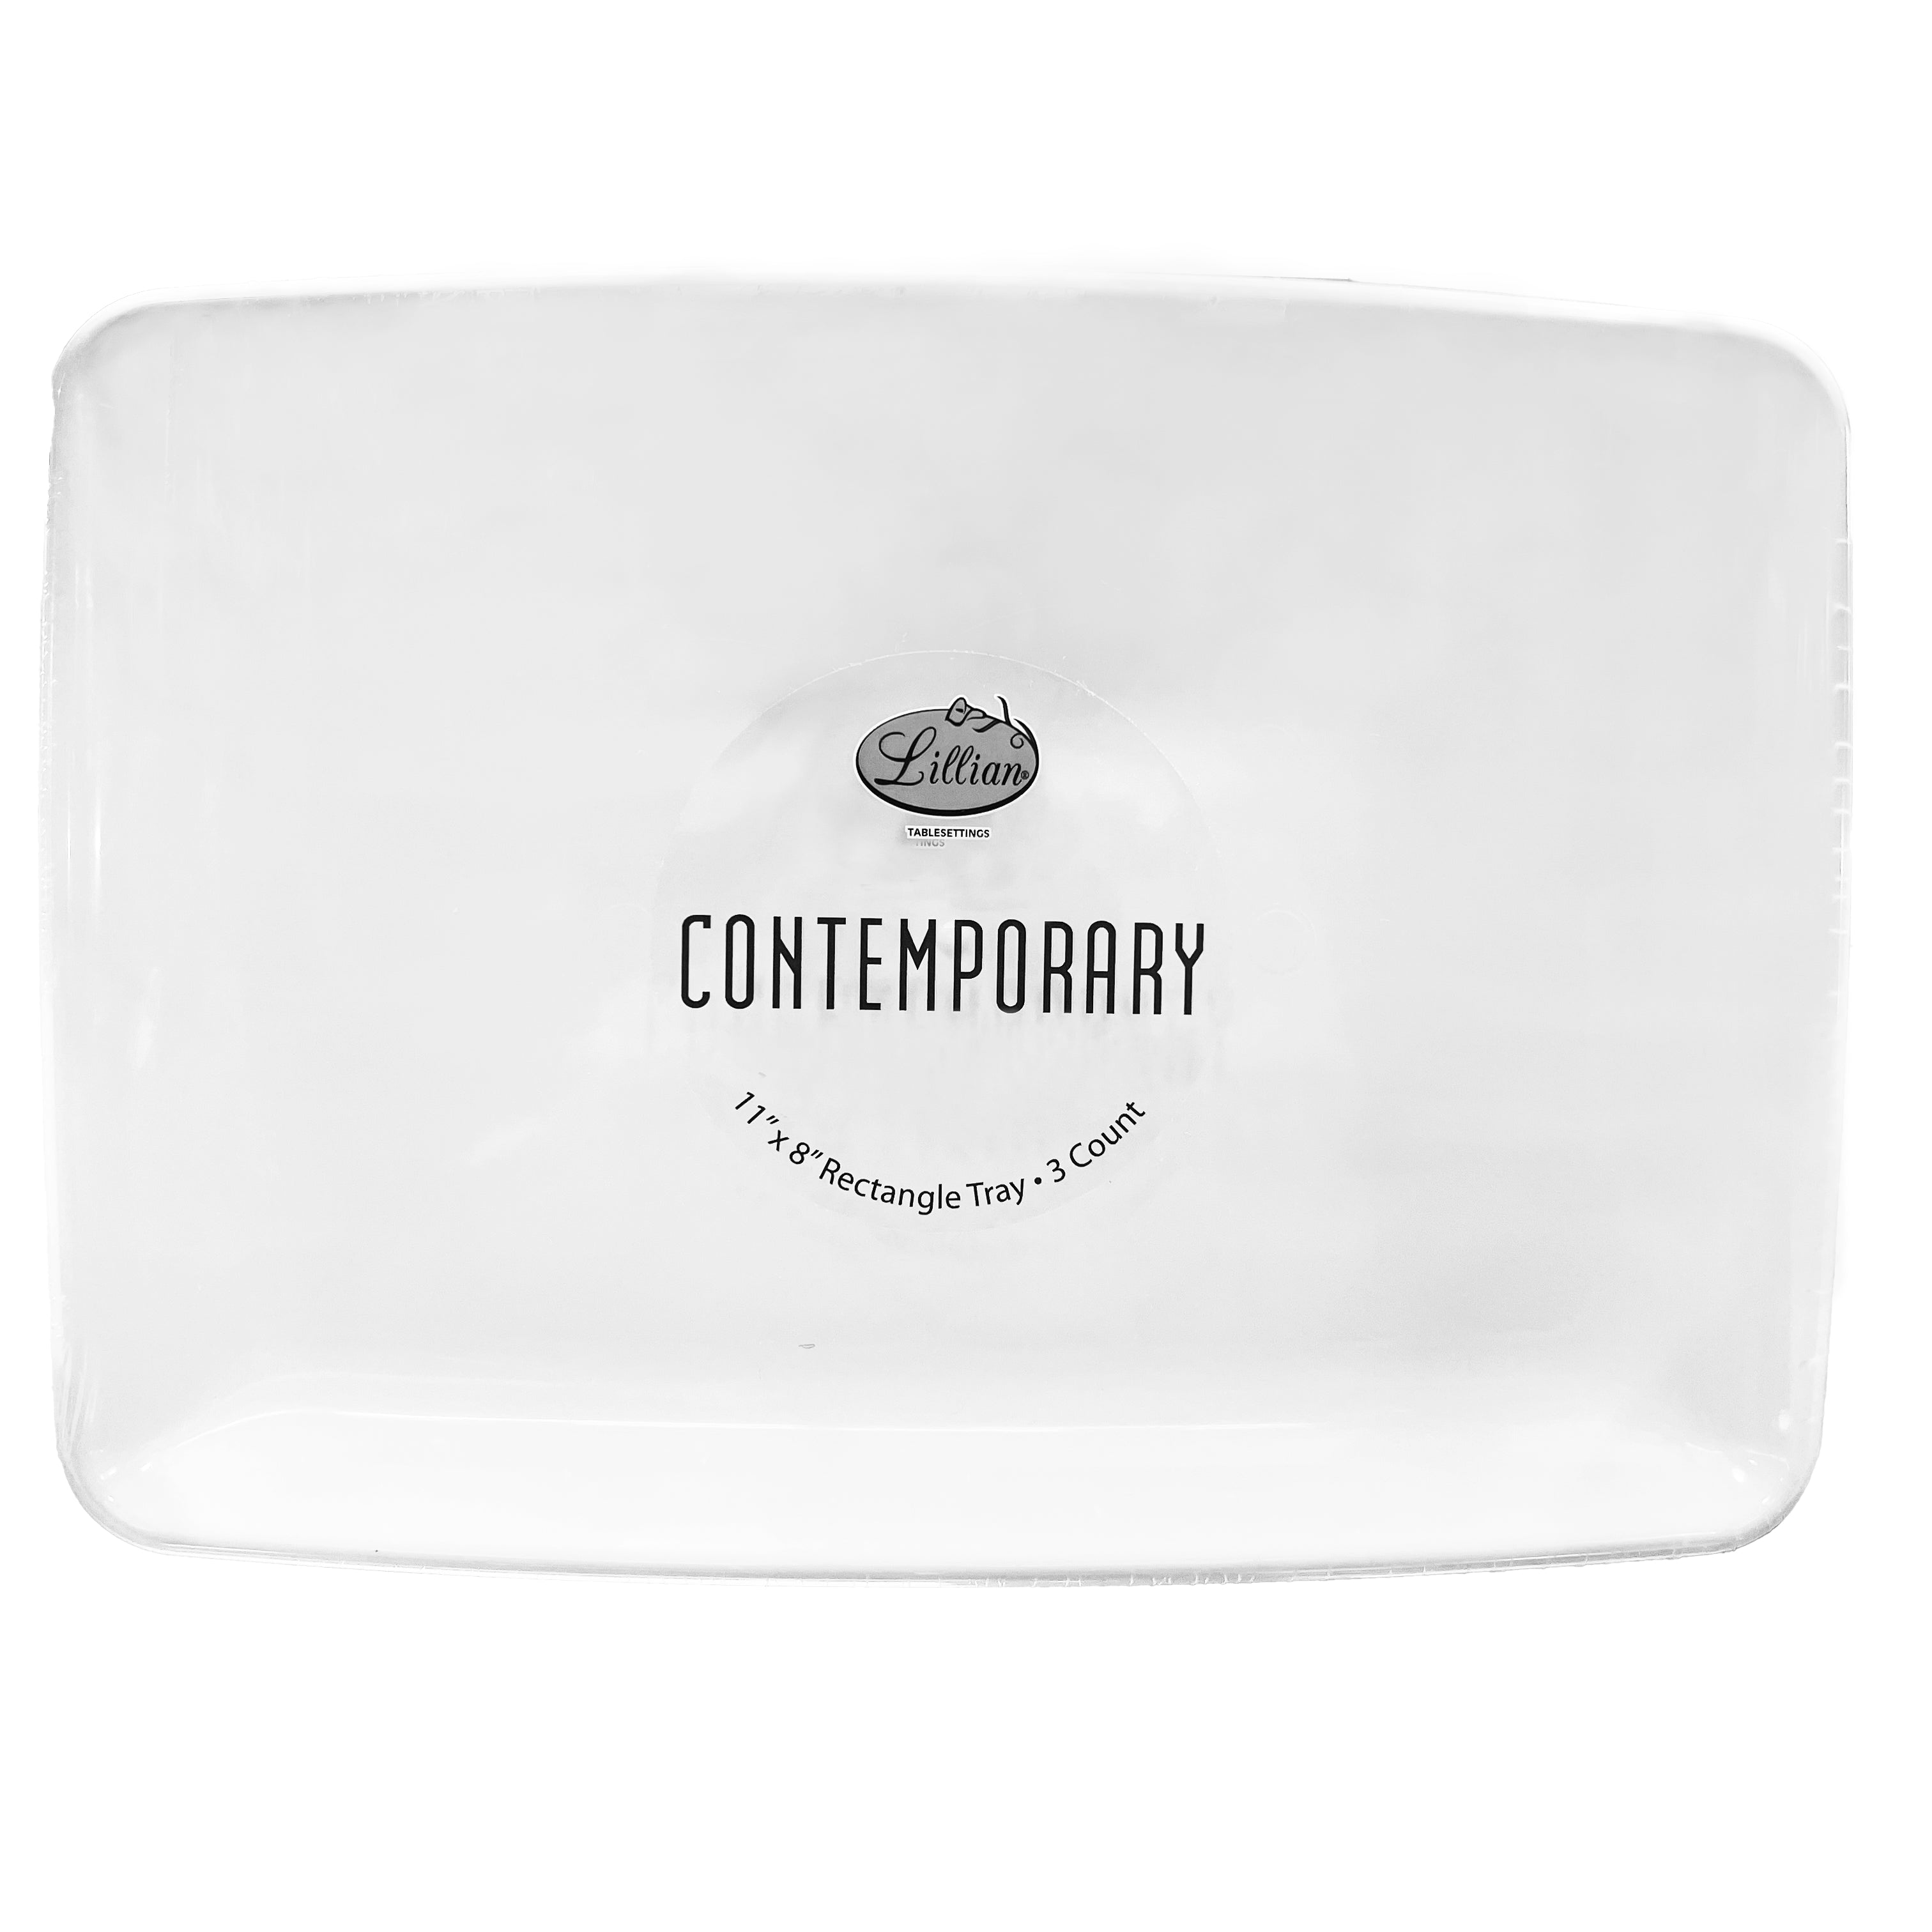 Premium Heavy Weight Disposable Plastic White Serving Tray – 11" x 8" – Set of 3